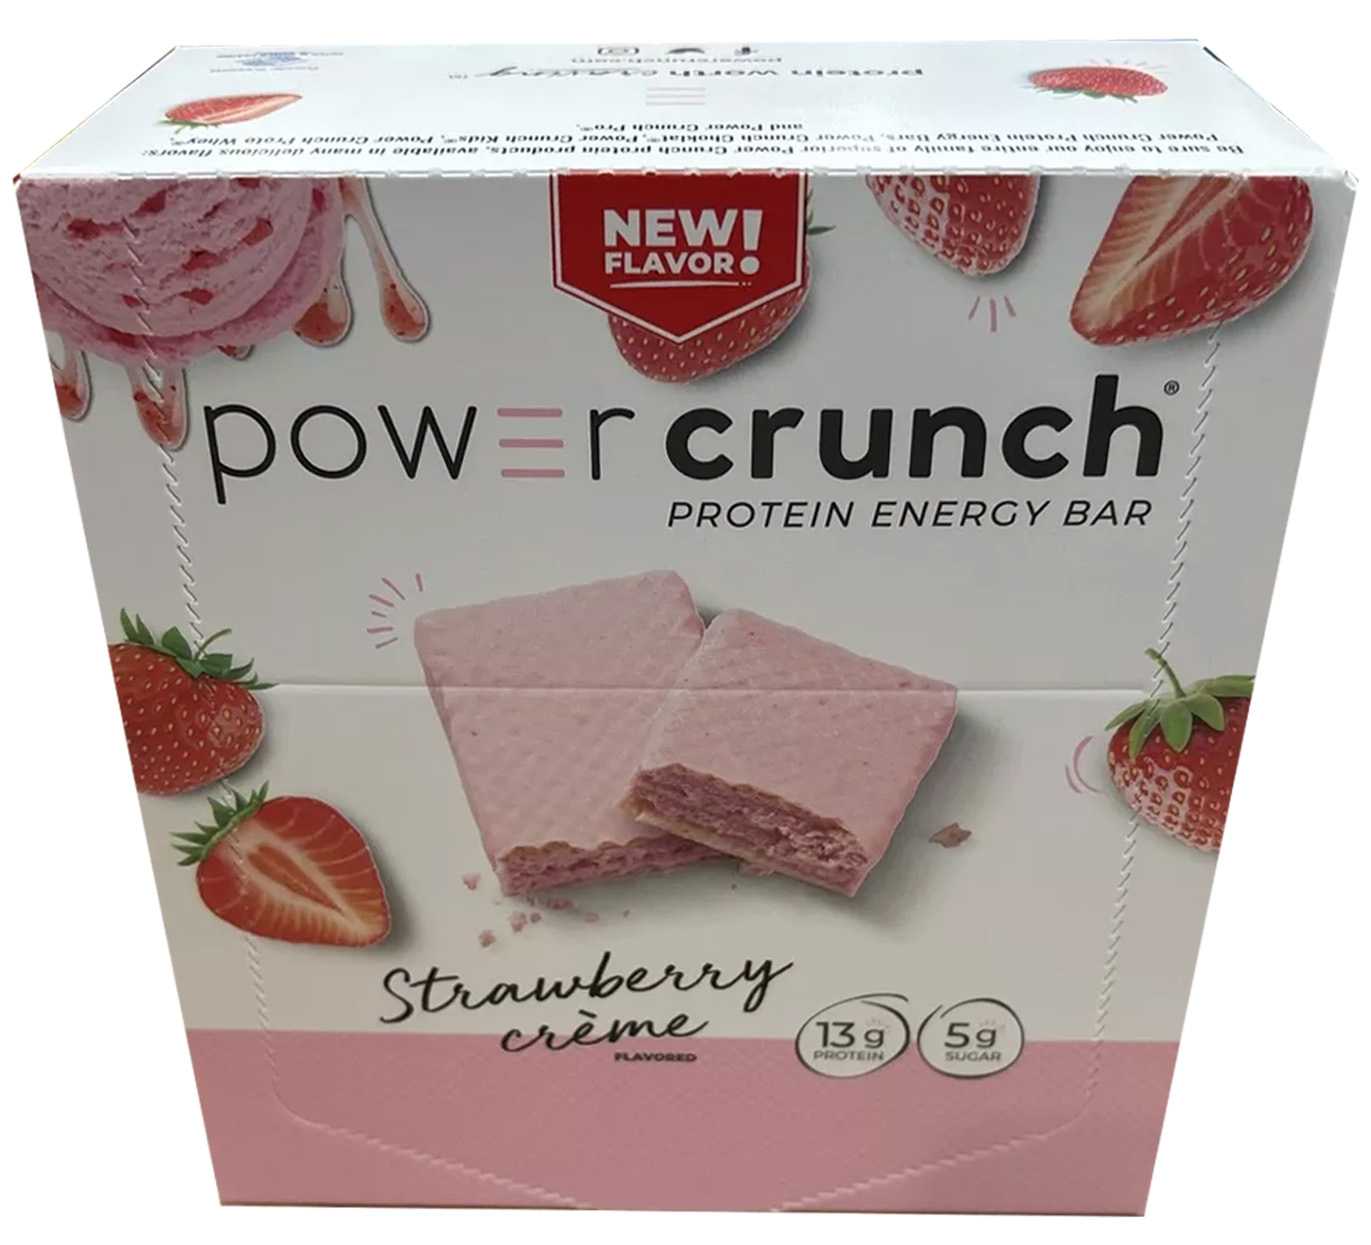 Primary image for Power Crunch Protein Energy Bar, Strawberry Creme, 12 Bars, 1.4 oz (40 g) Each